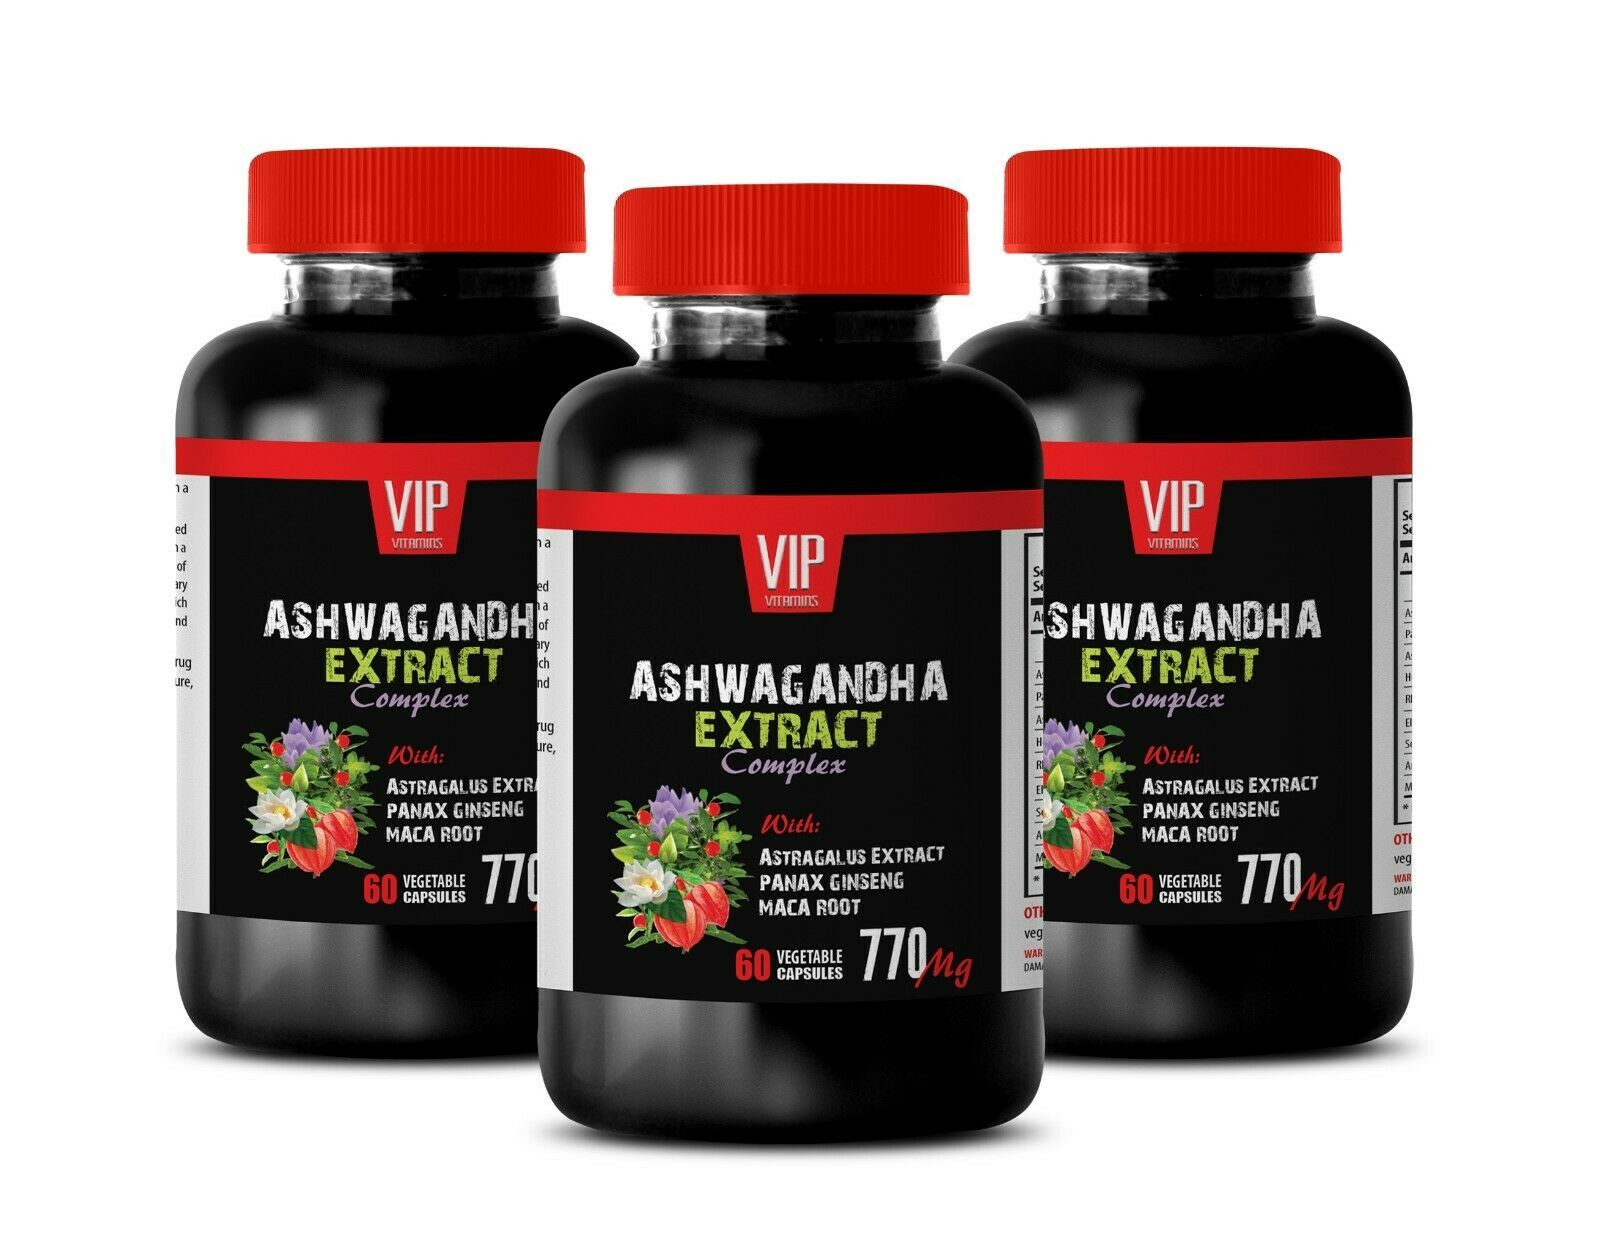 Primary image for immune boosting supplement - ASHWAGANDHA COMPLEX 770MG - neuroprotective 3B